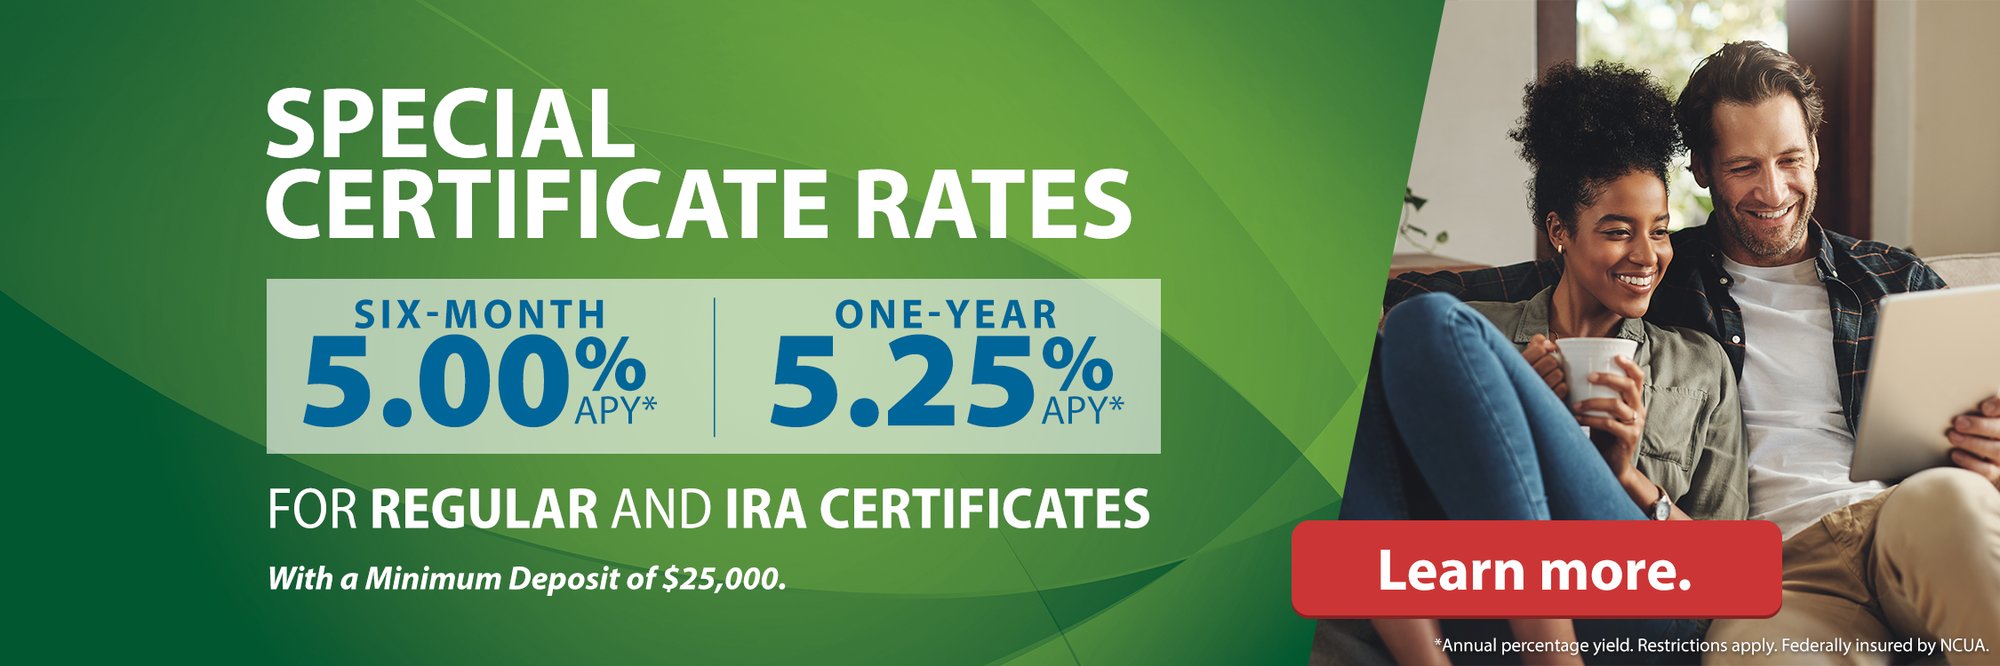 Special Certificate Rates Six-month 5.00% APY* One-year 5.25% APY* For Regular and IRA Certificates With a Minimum Deposit of $25,000. Learn more. (*Annual percentage yield. Restrictions apply. Federally insured by NCUA.)